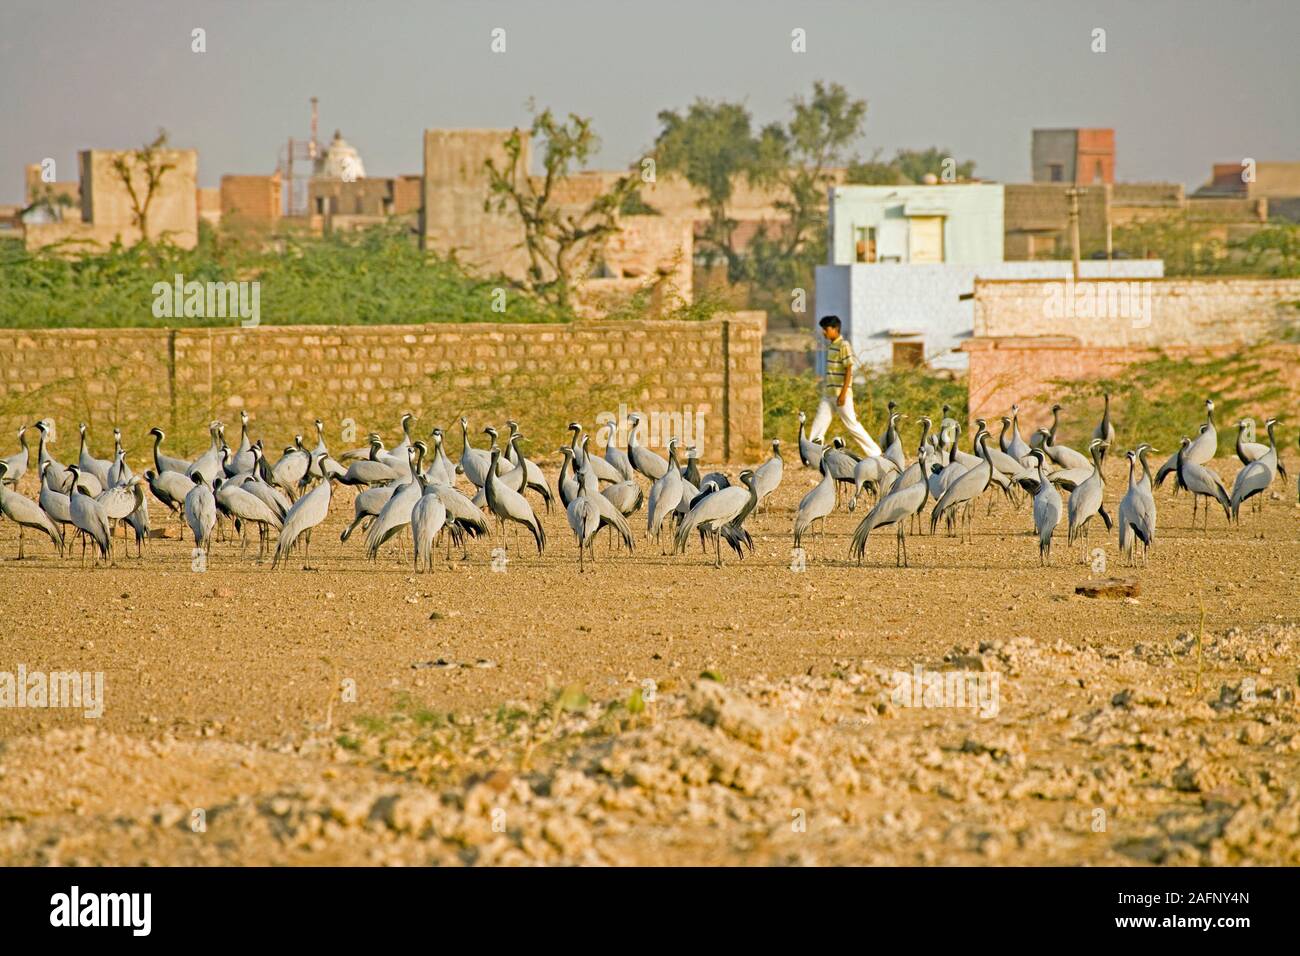 DEMOISELLE CRANES Anthropoides virgo Overwintering birds encouraged and supportrd by villagers who feed them. Khichan, Rajasthan, India.  February. Stock Photo